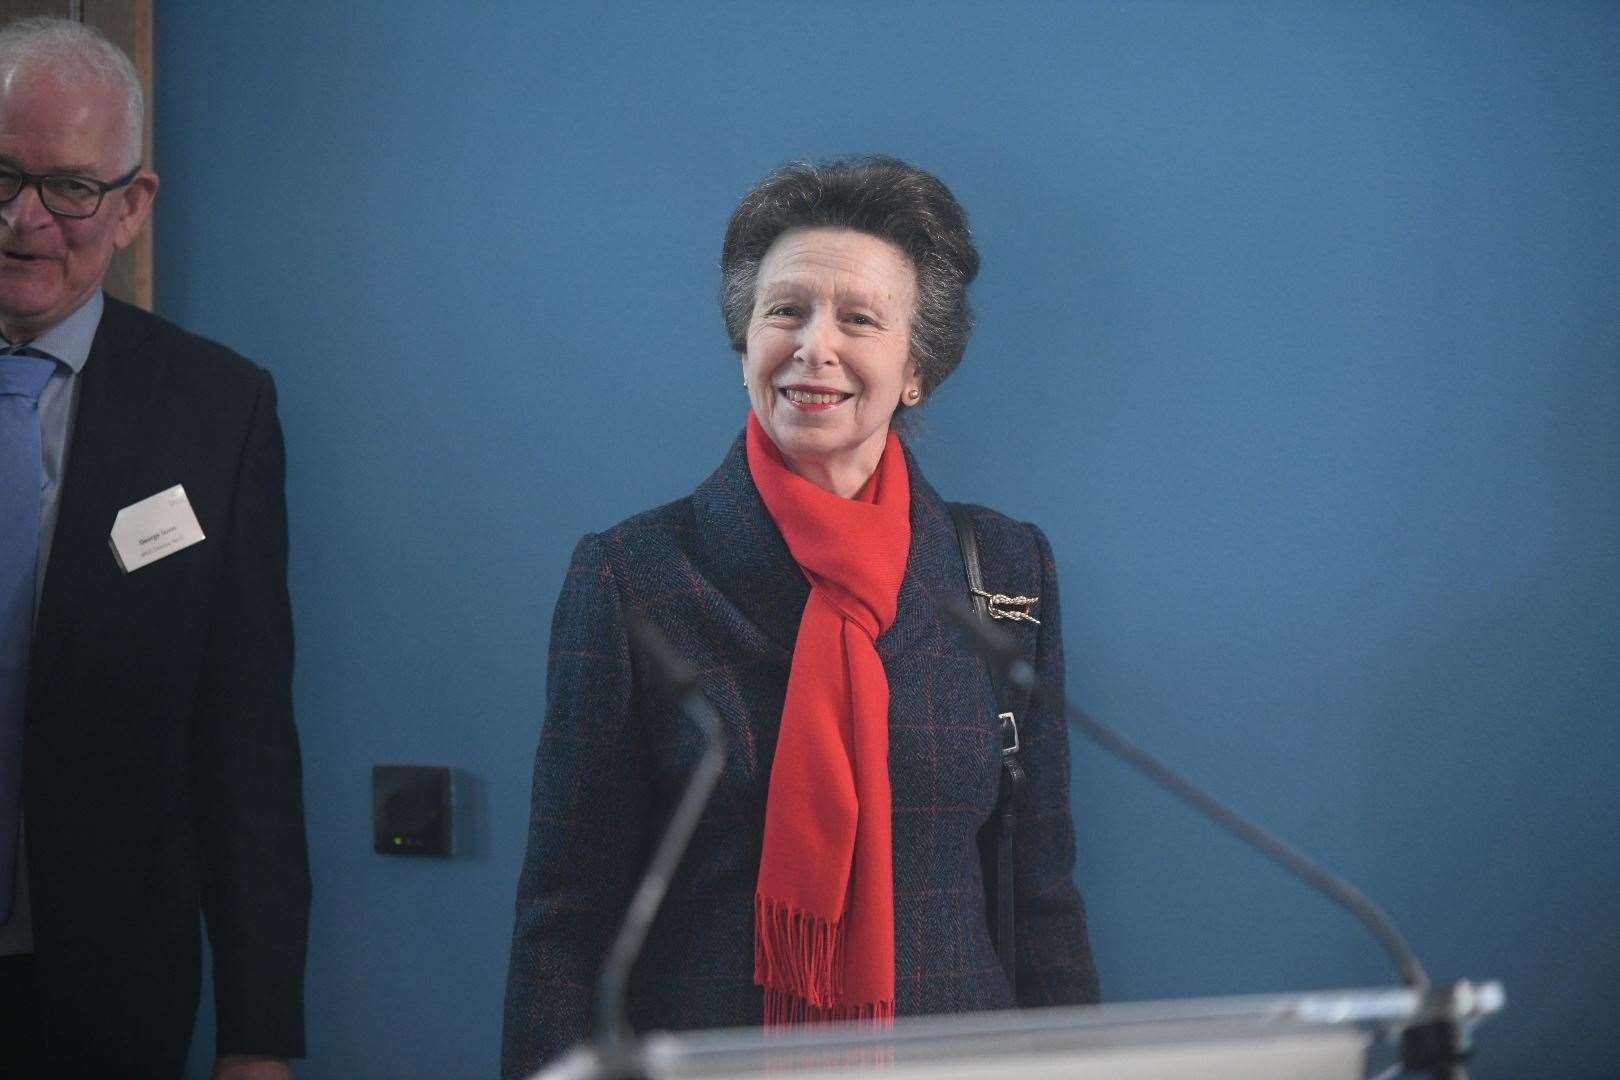 The new Rural and Veterinary Innovation Centre at Inverness Campus is officially opened by Princess Anne.